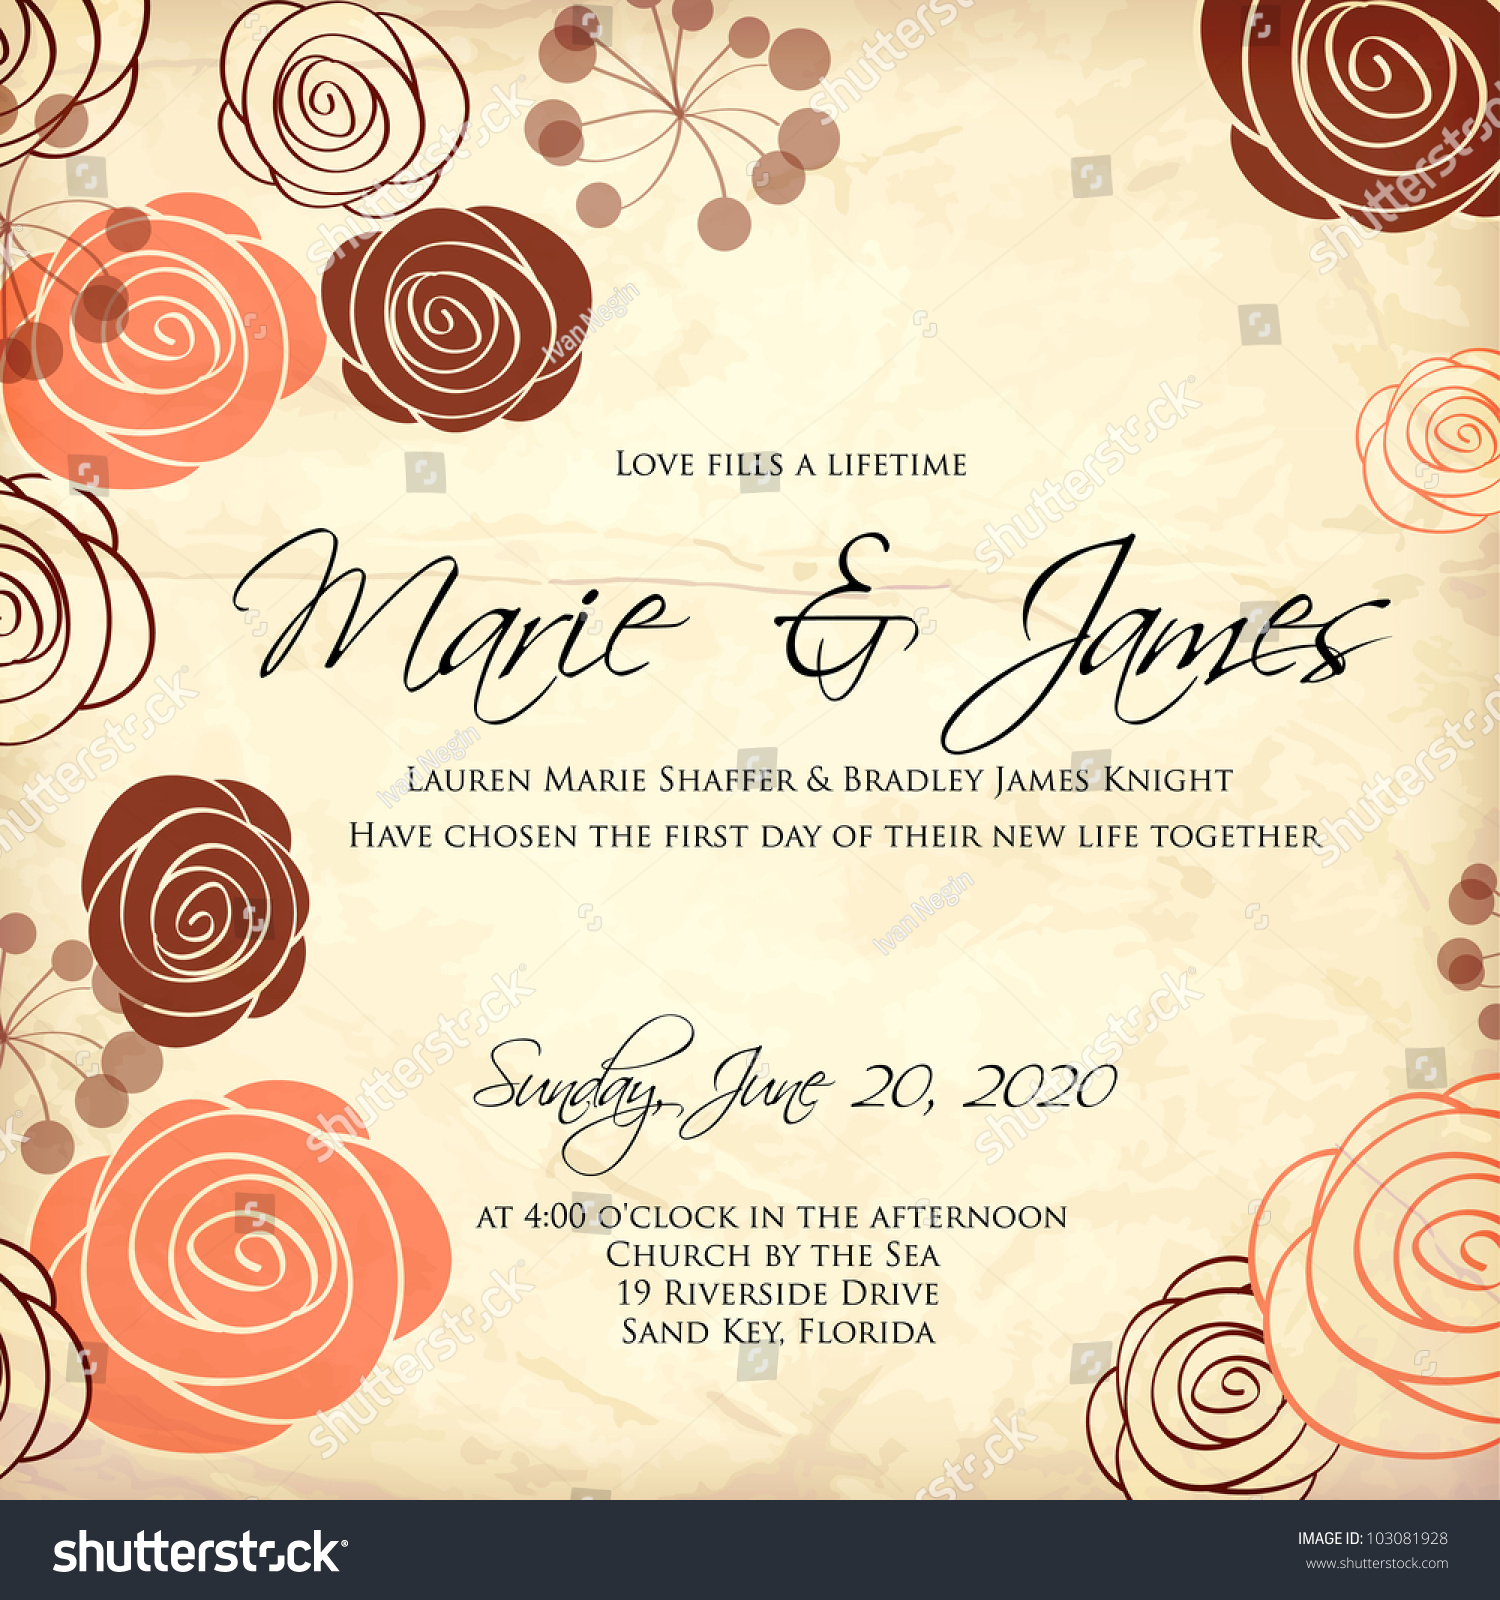 Wedding Card Invitation Abstract Floral Background Stock ...